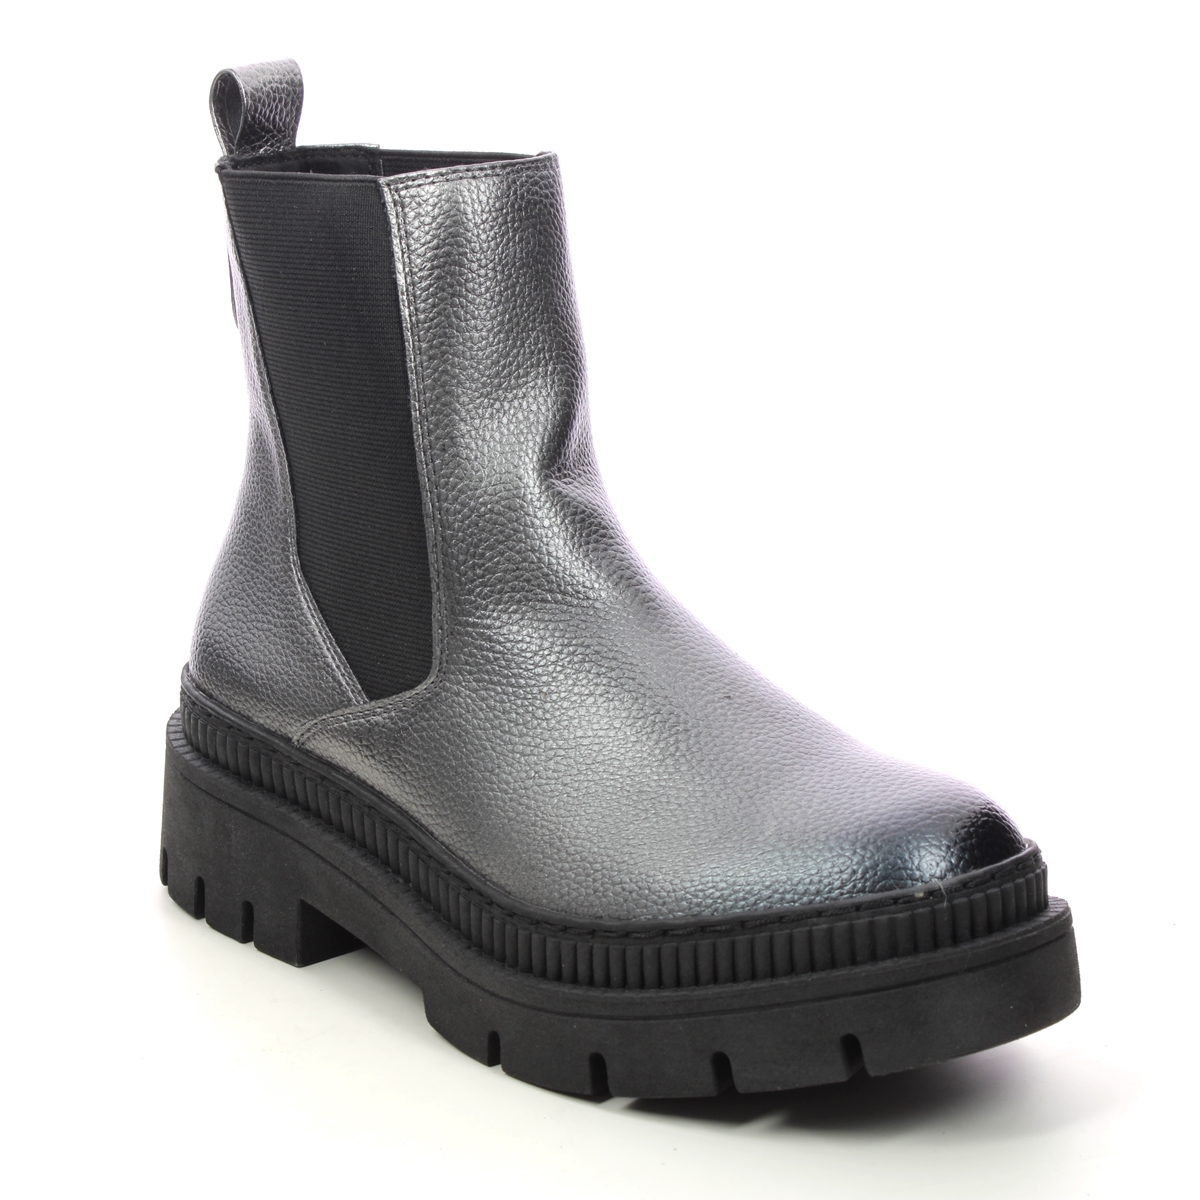 Marco Tozzi Rostra Chelsea Pewter Womens Chelsea Boots 25822-41-915 in a Plain Man-made in Size 41